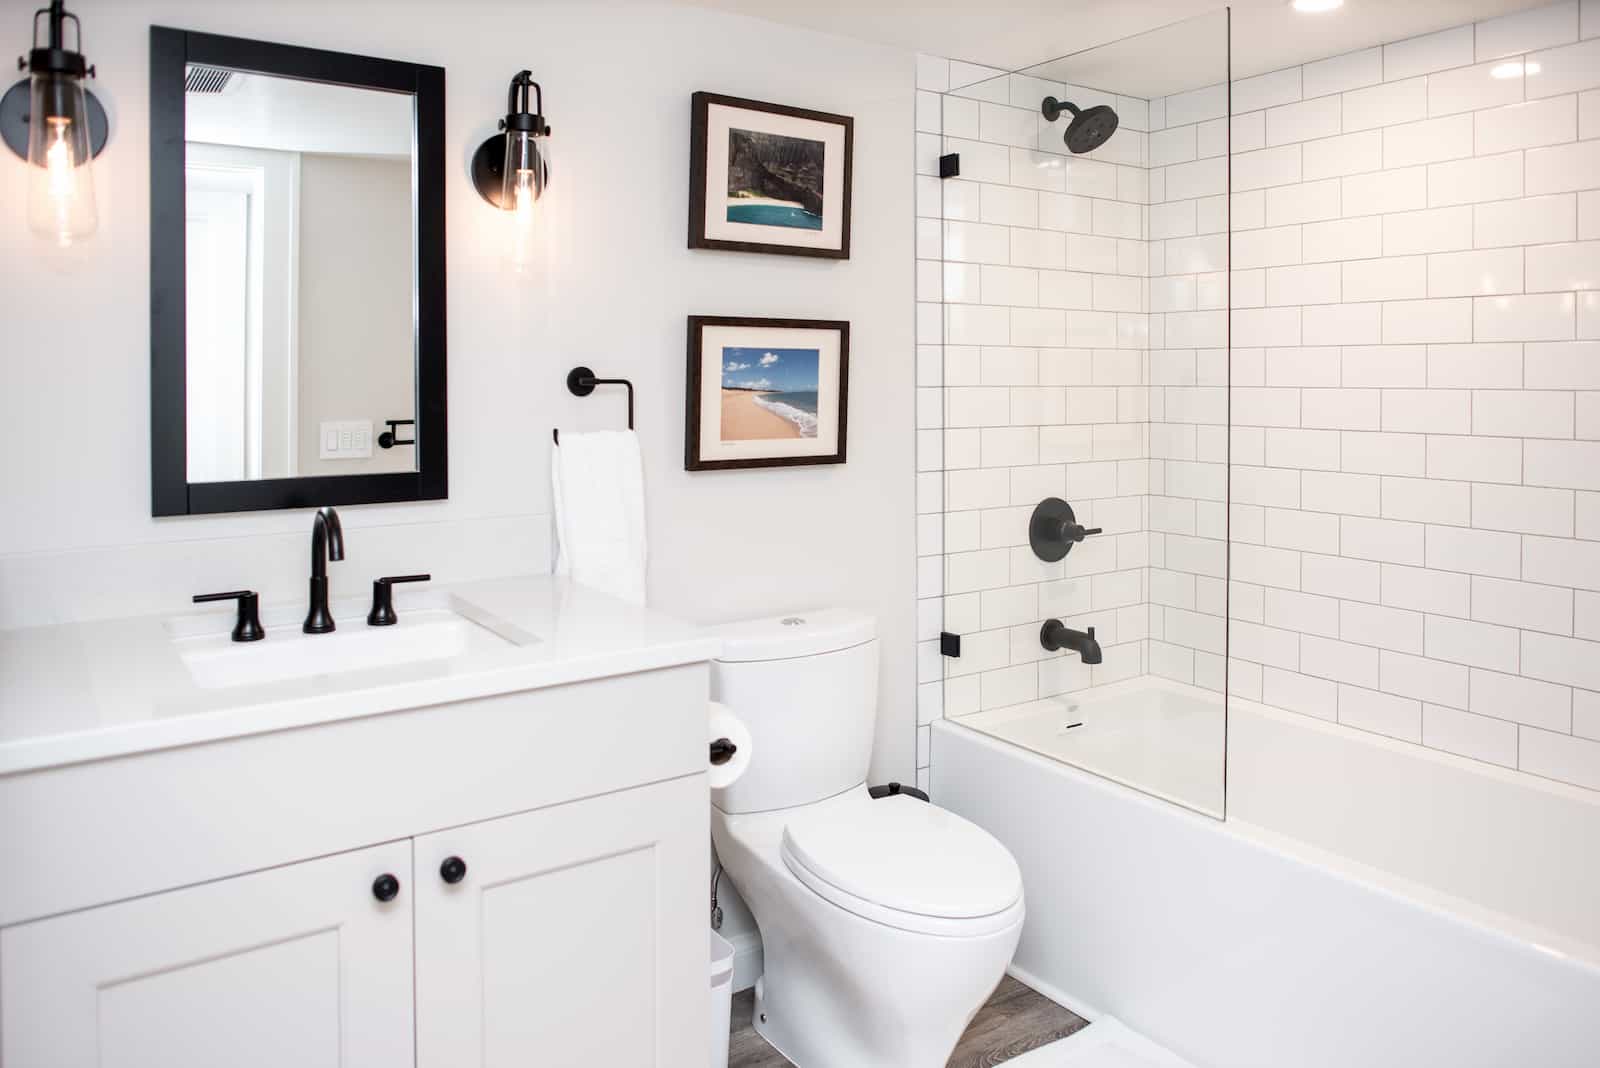 Seattle bathroom remodel - are permits required